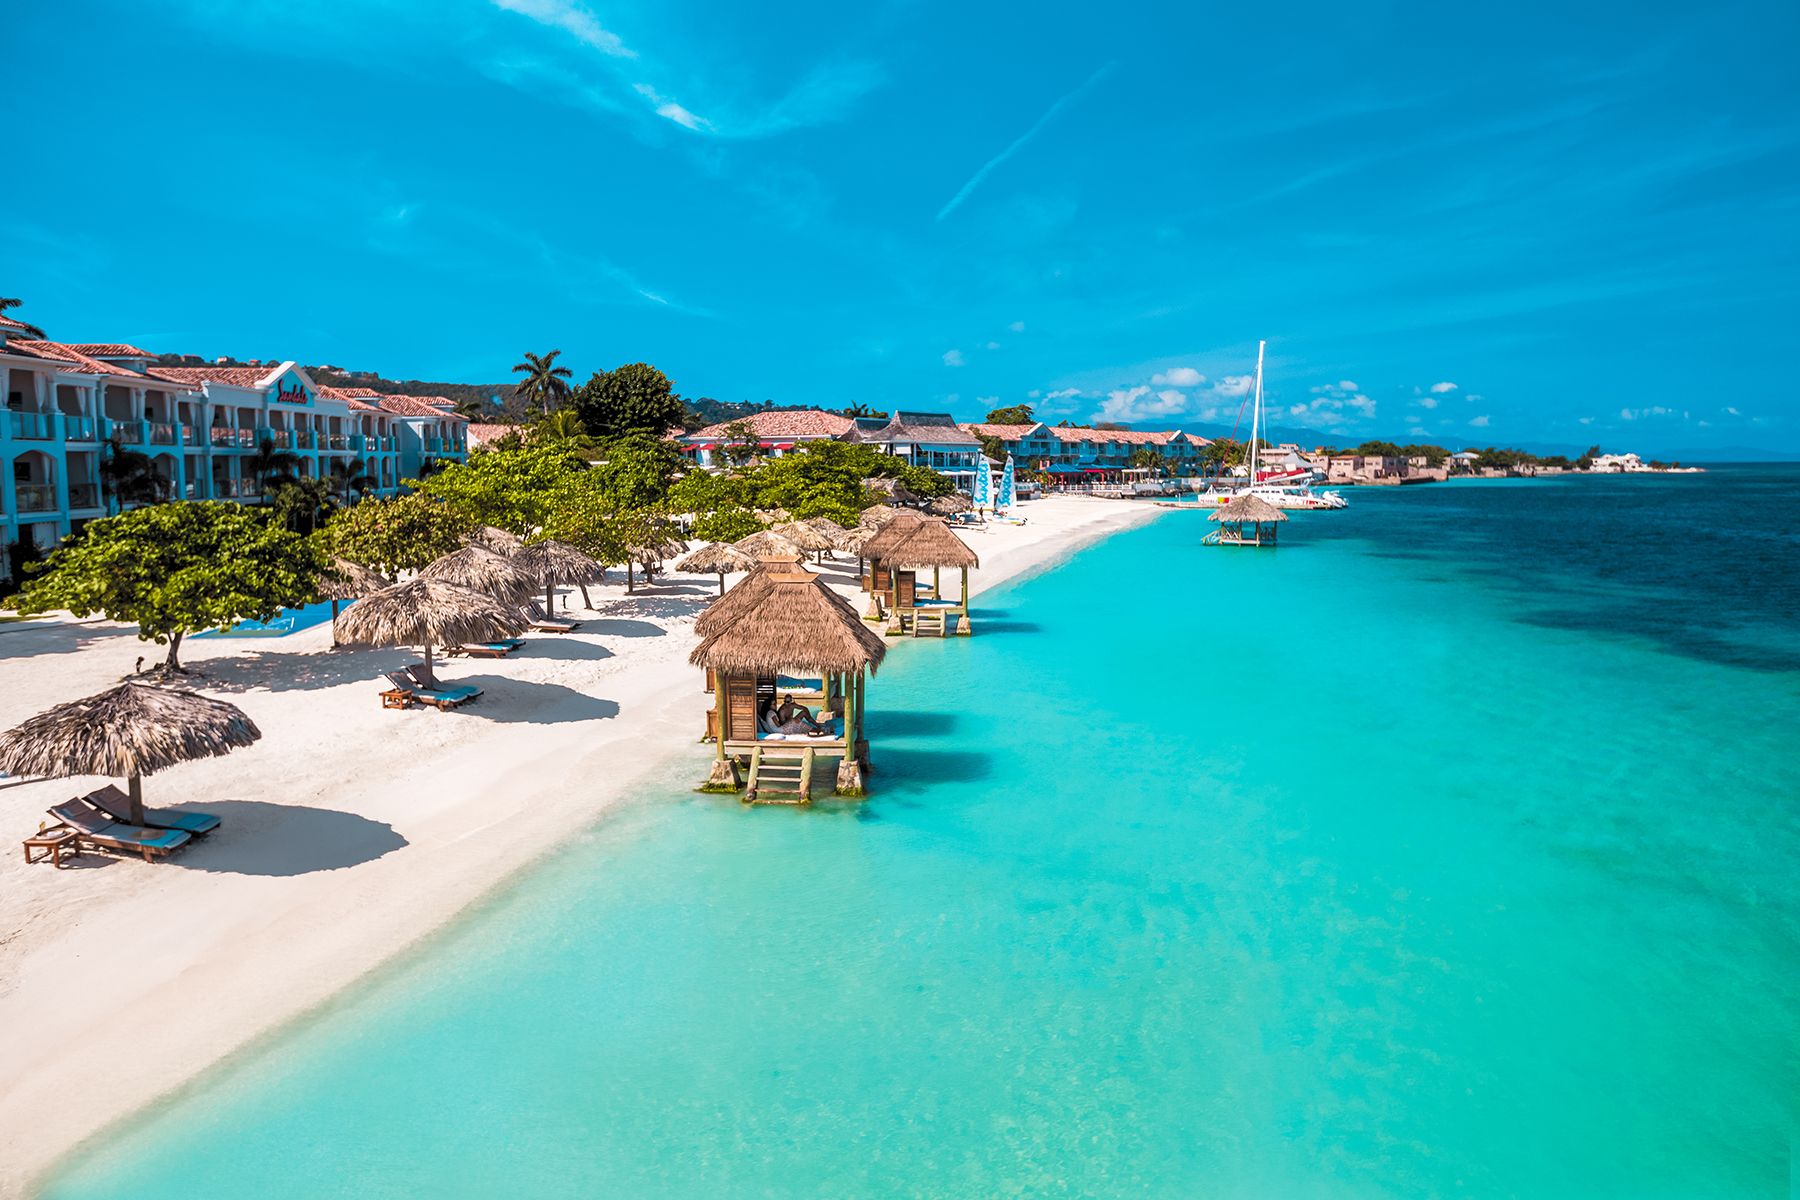 Sandals Montego Bay Front Beach Overview